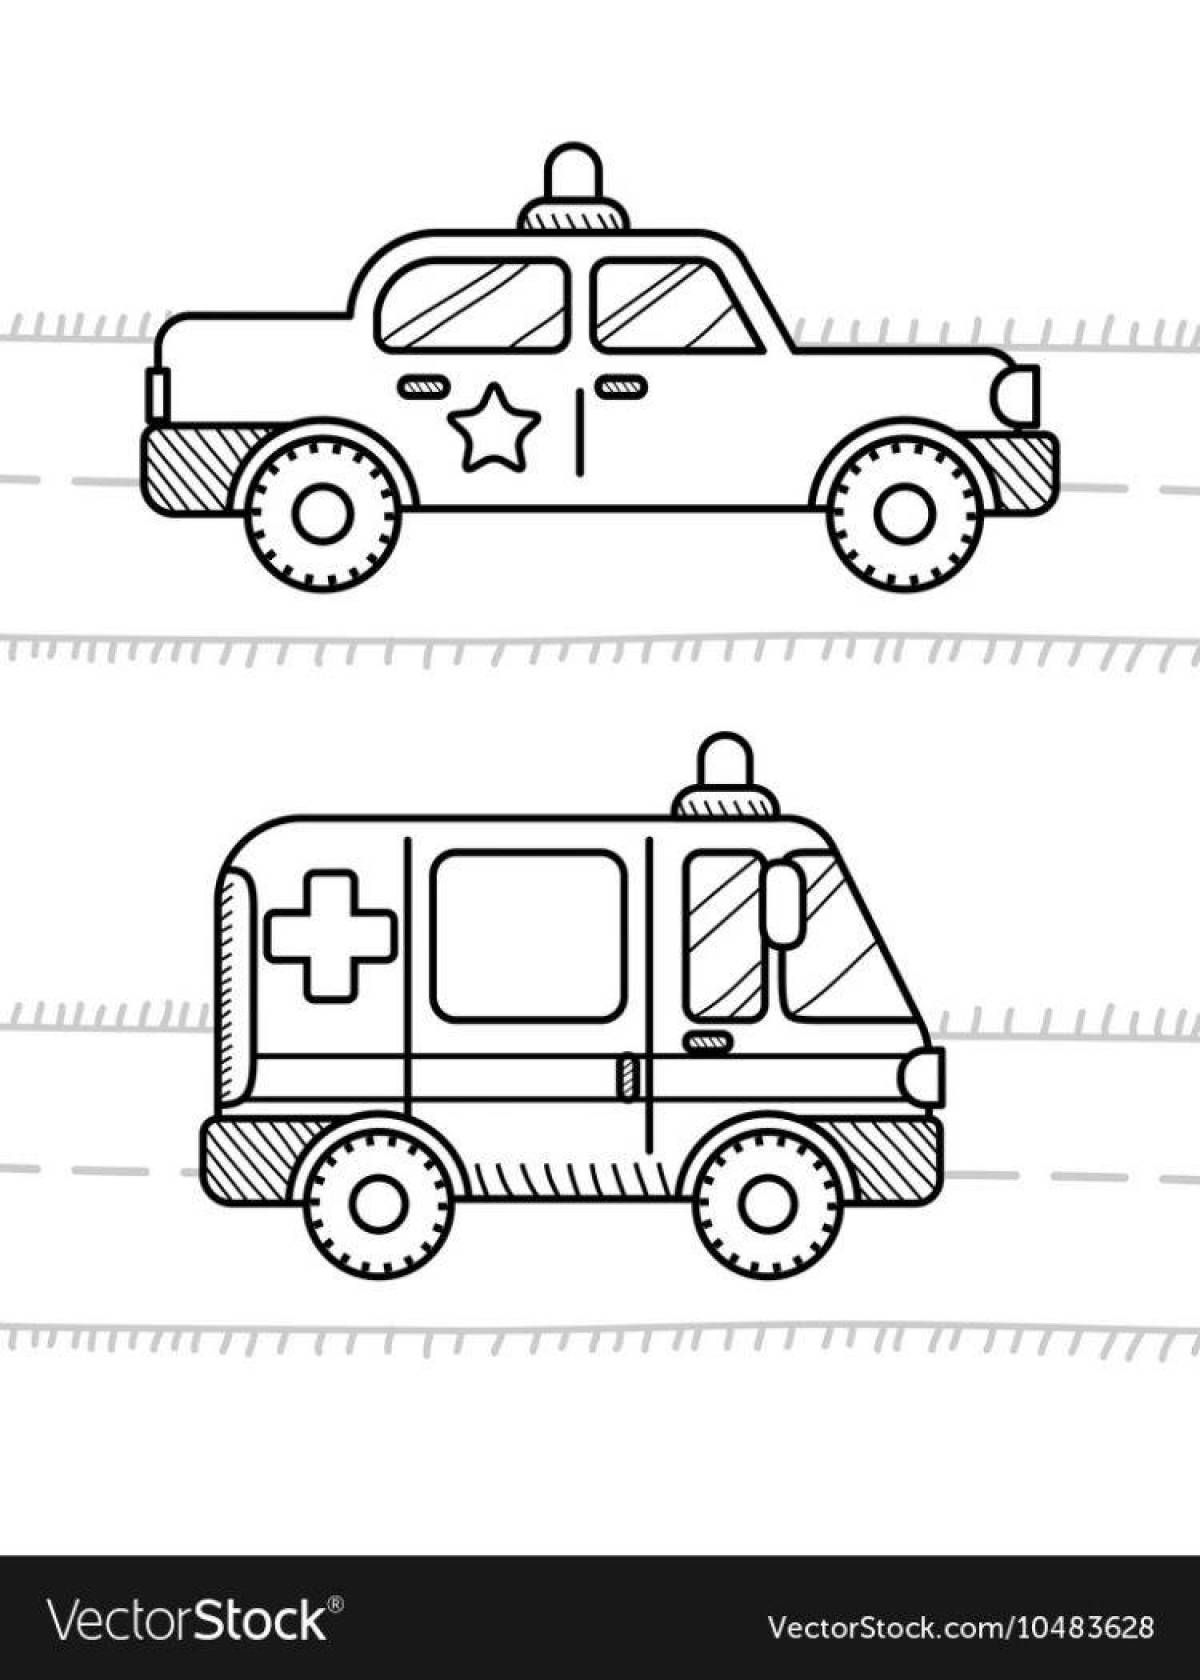 Attractive emergency service coloring page